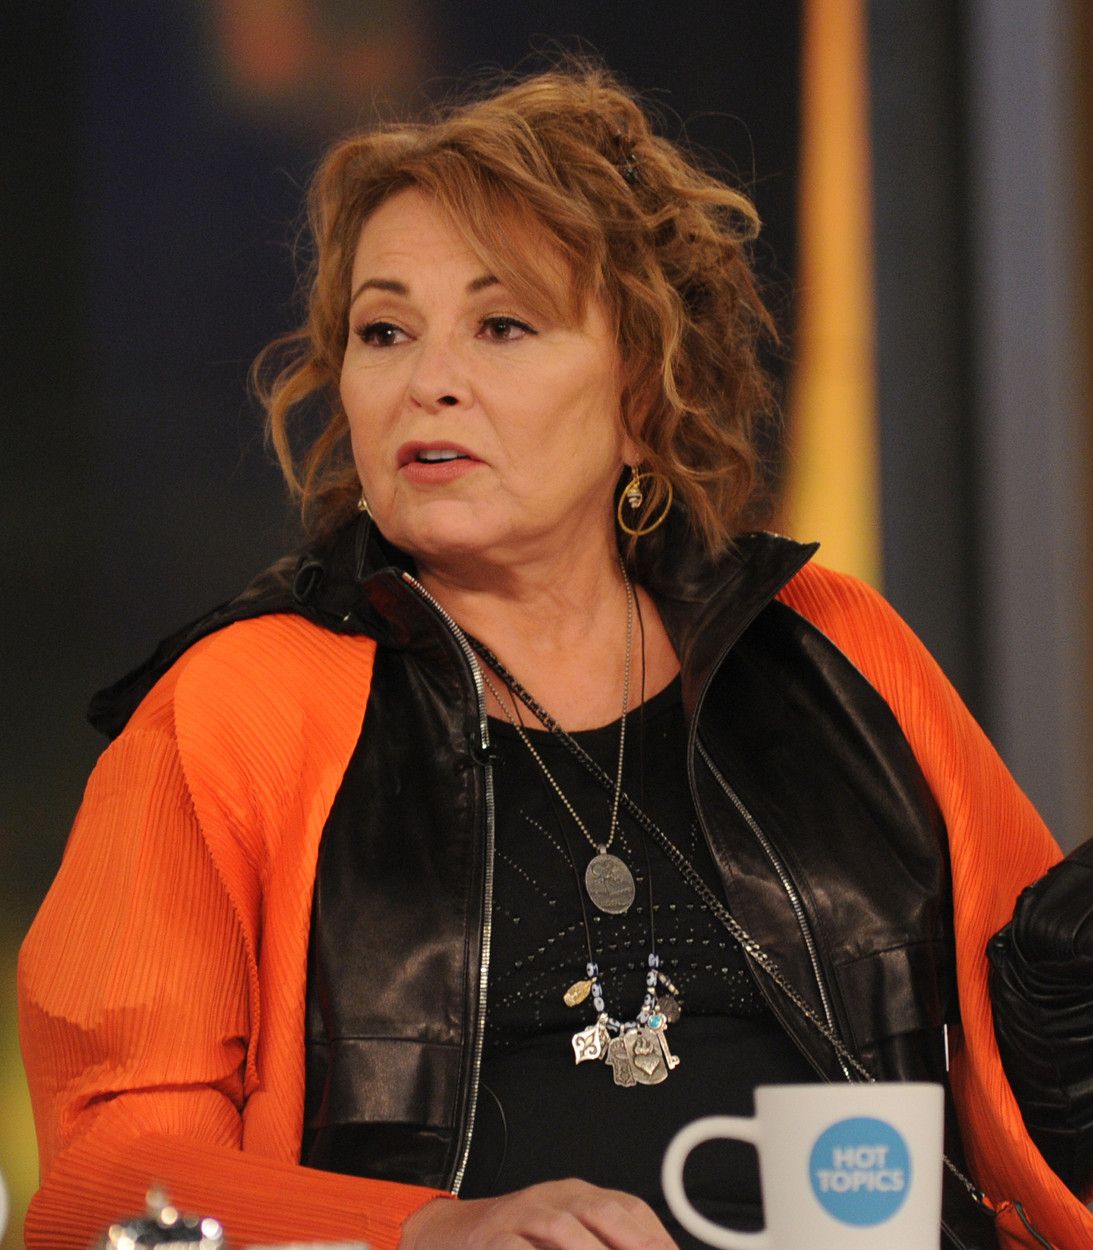 Roseanne Barr on The View TLDR Vertical